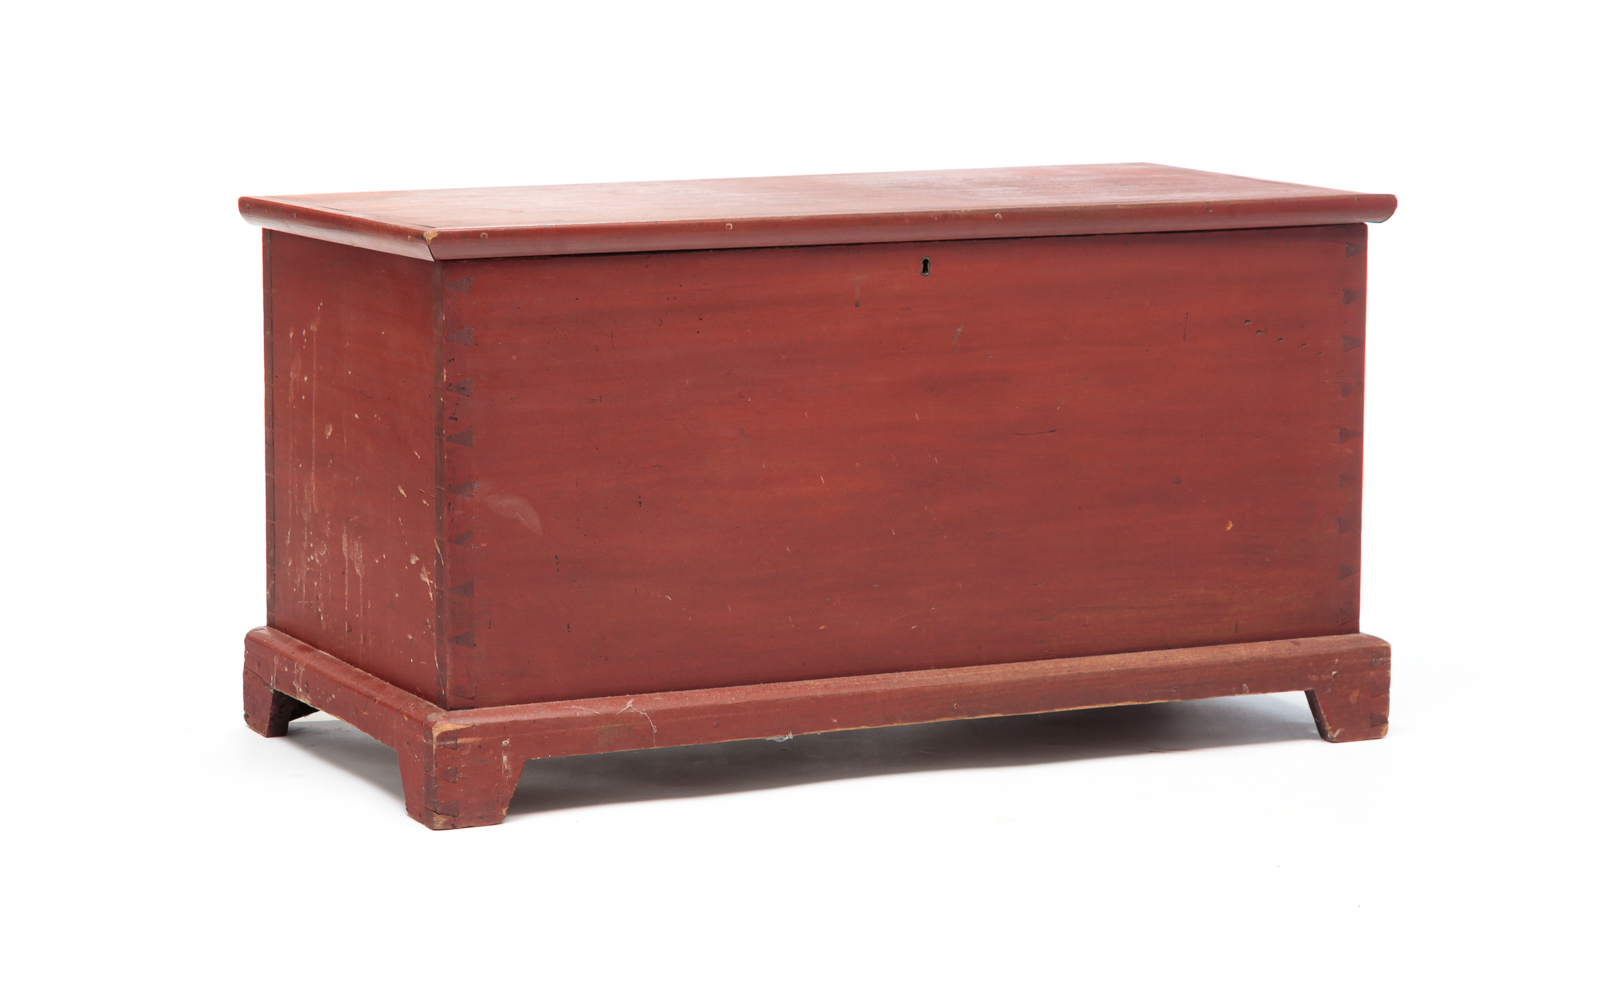 AMERICAN PAINTED BLANKET CHEST  2e0160